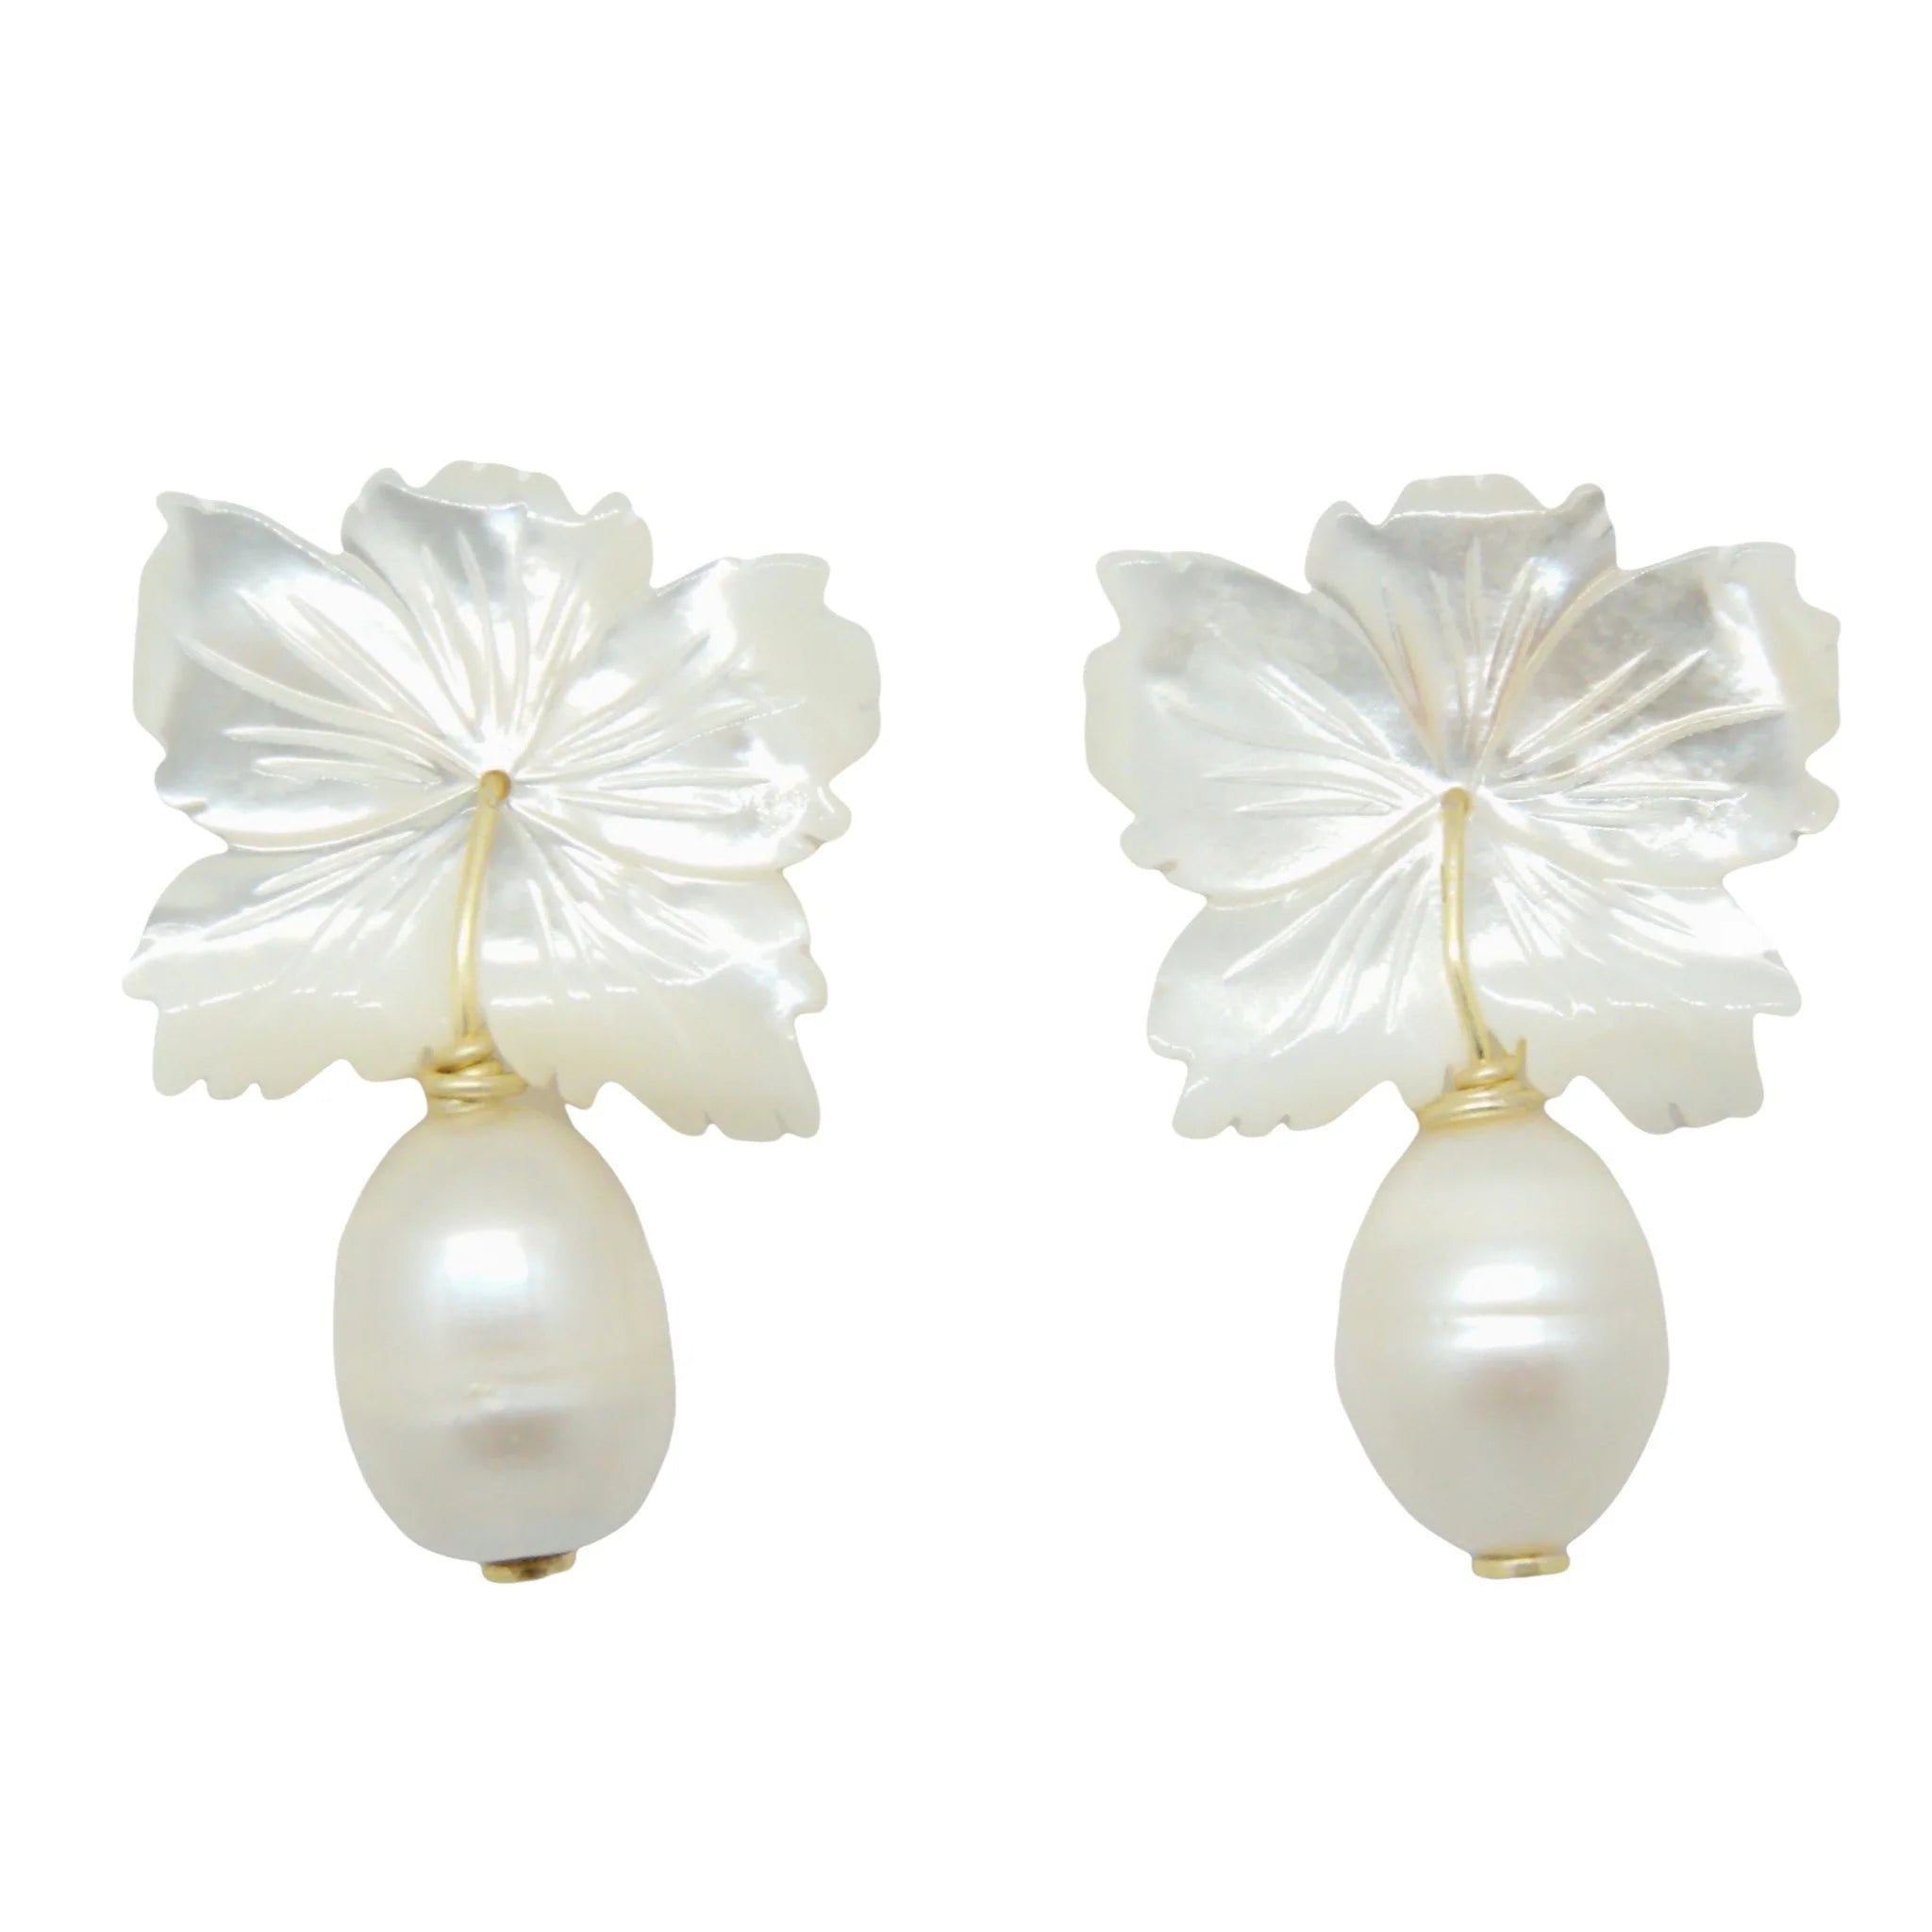 M. Donohue Audrey Earrings - Pearl